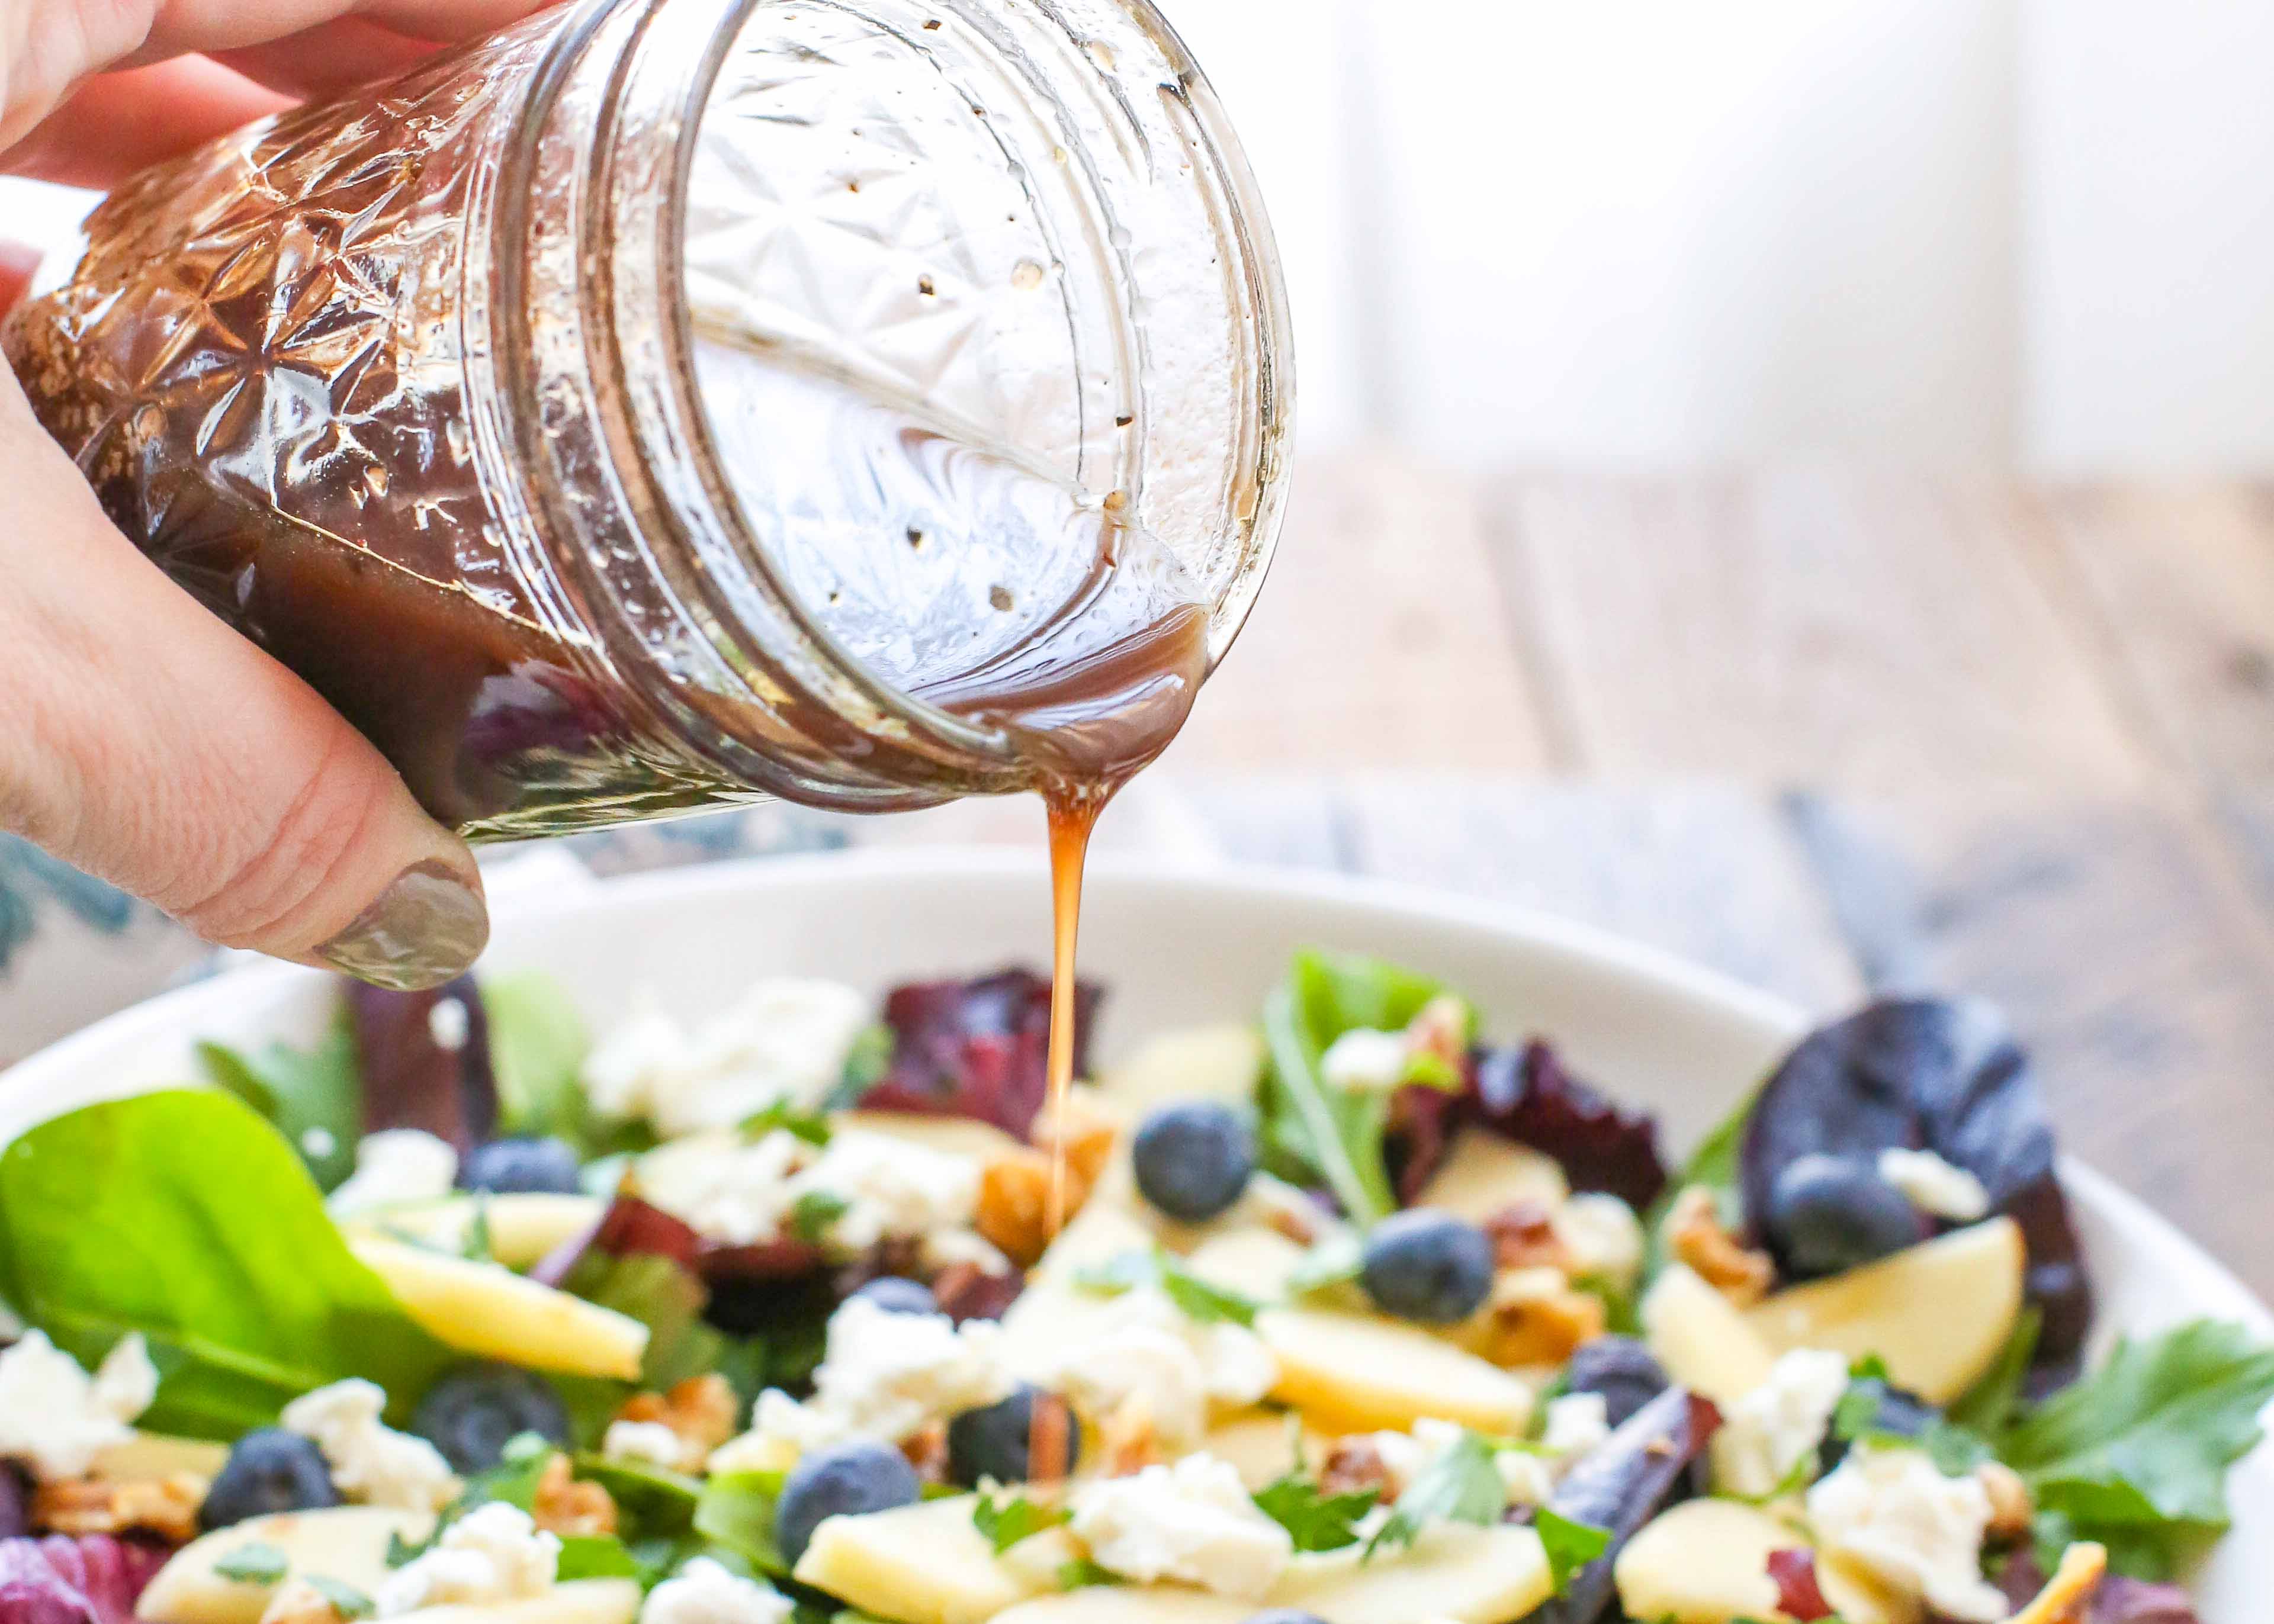 All-Purpose Vinaigrette {Easy, Minimal Ingredients!) - Plays Well With  Butter